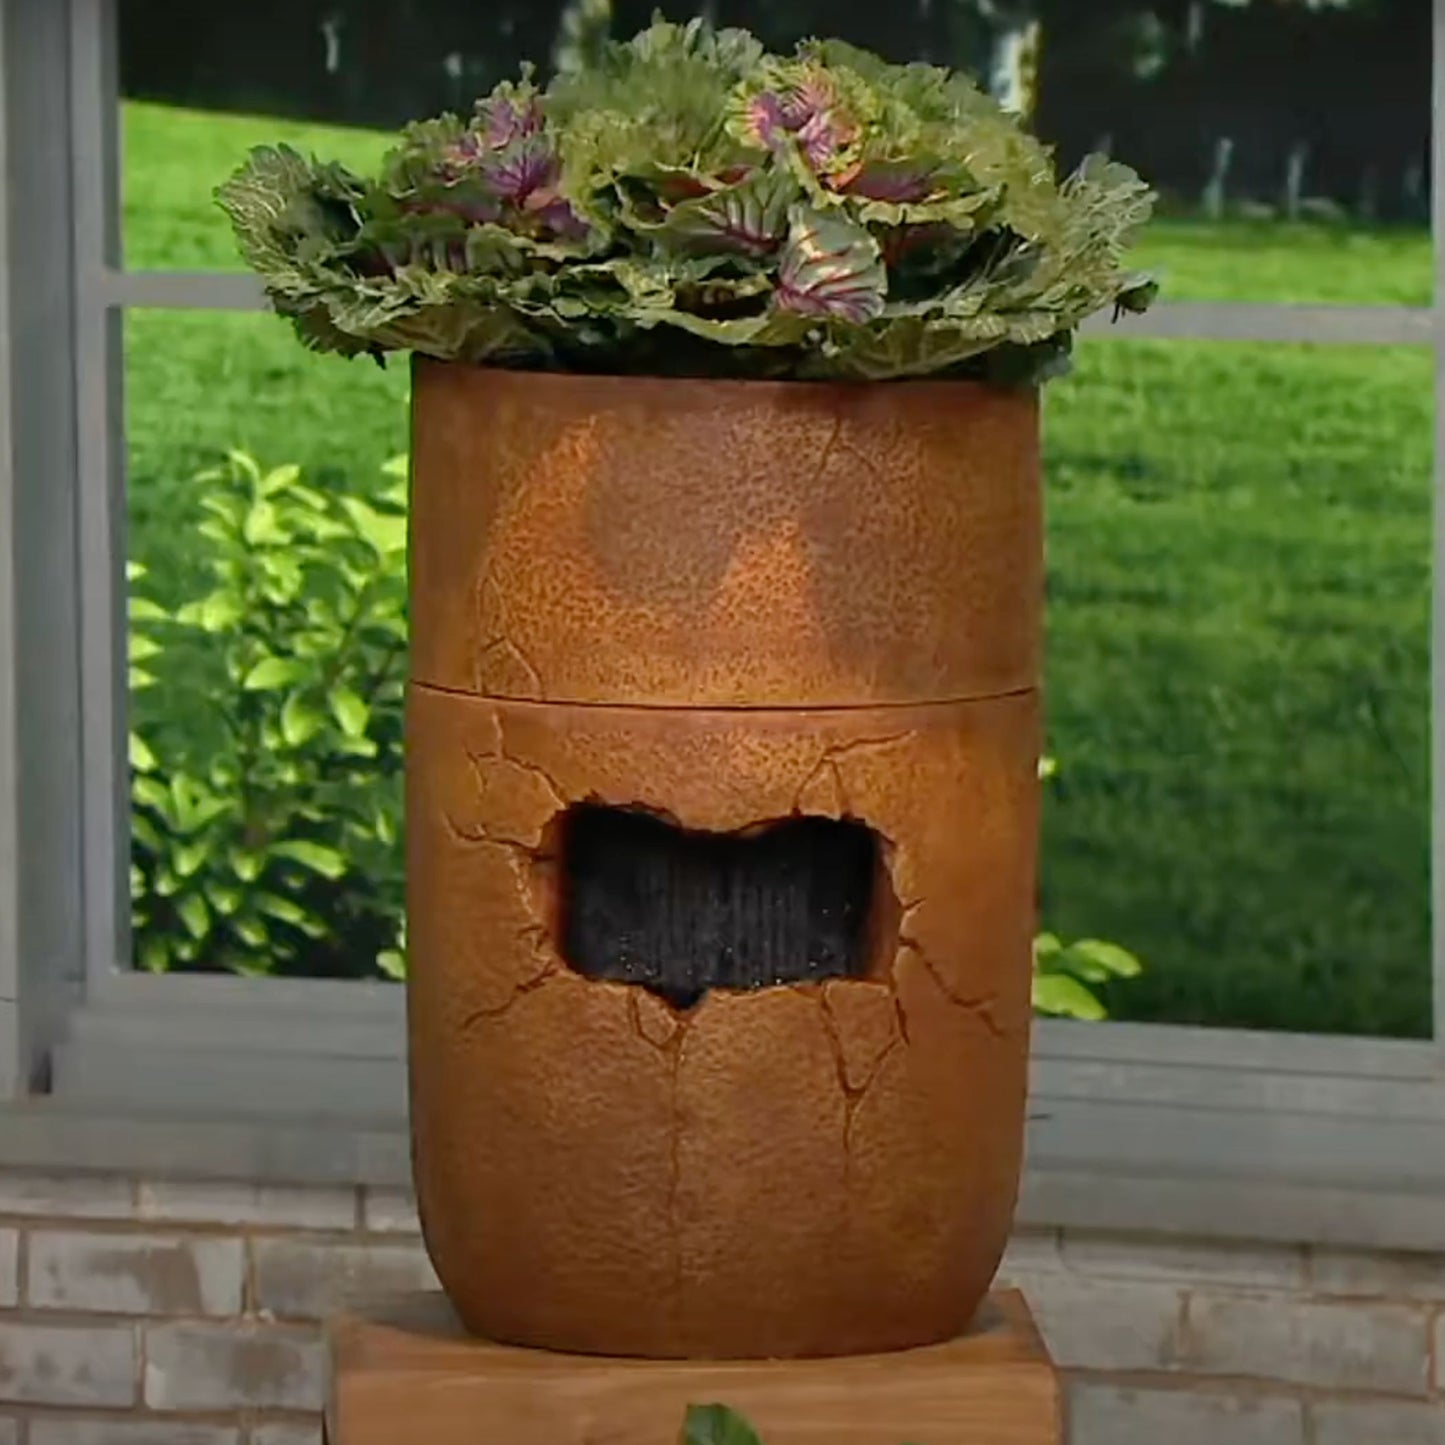 Rain Shower Fountain and Self-Watering Planter